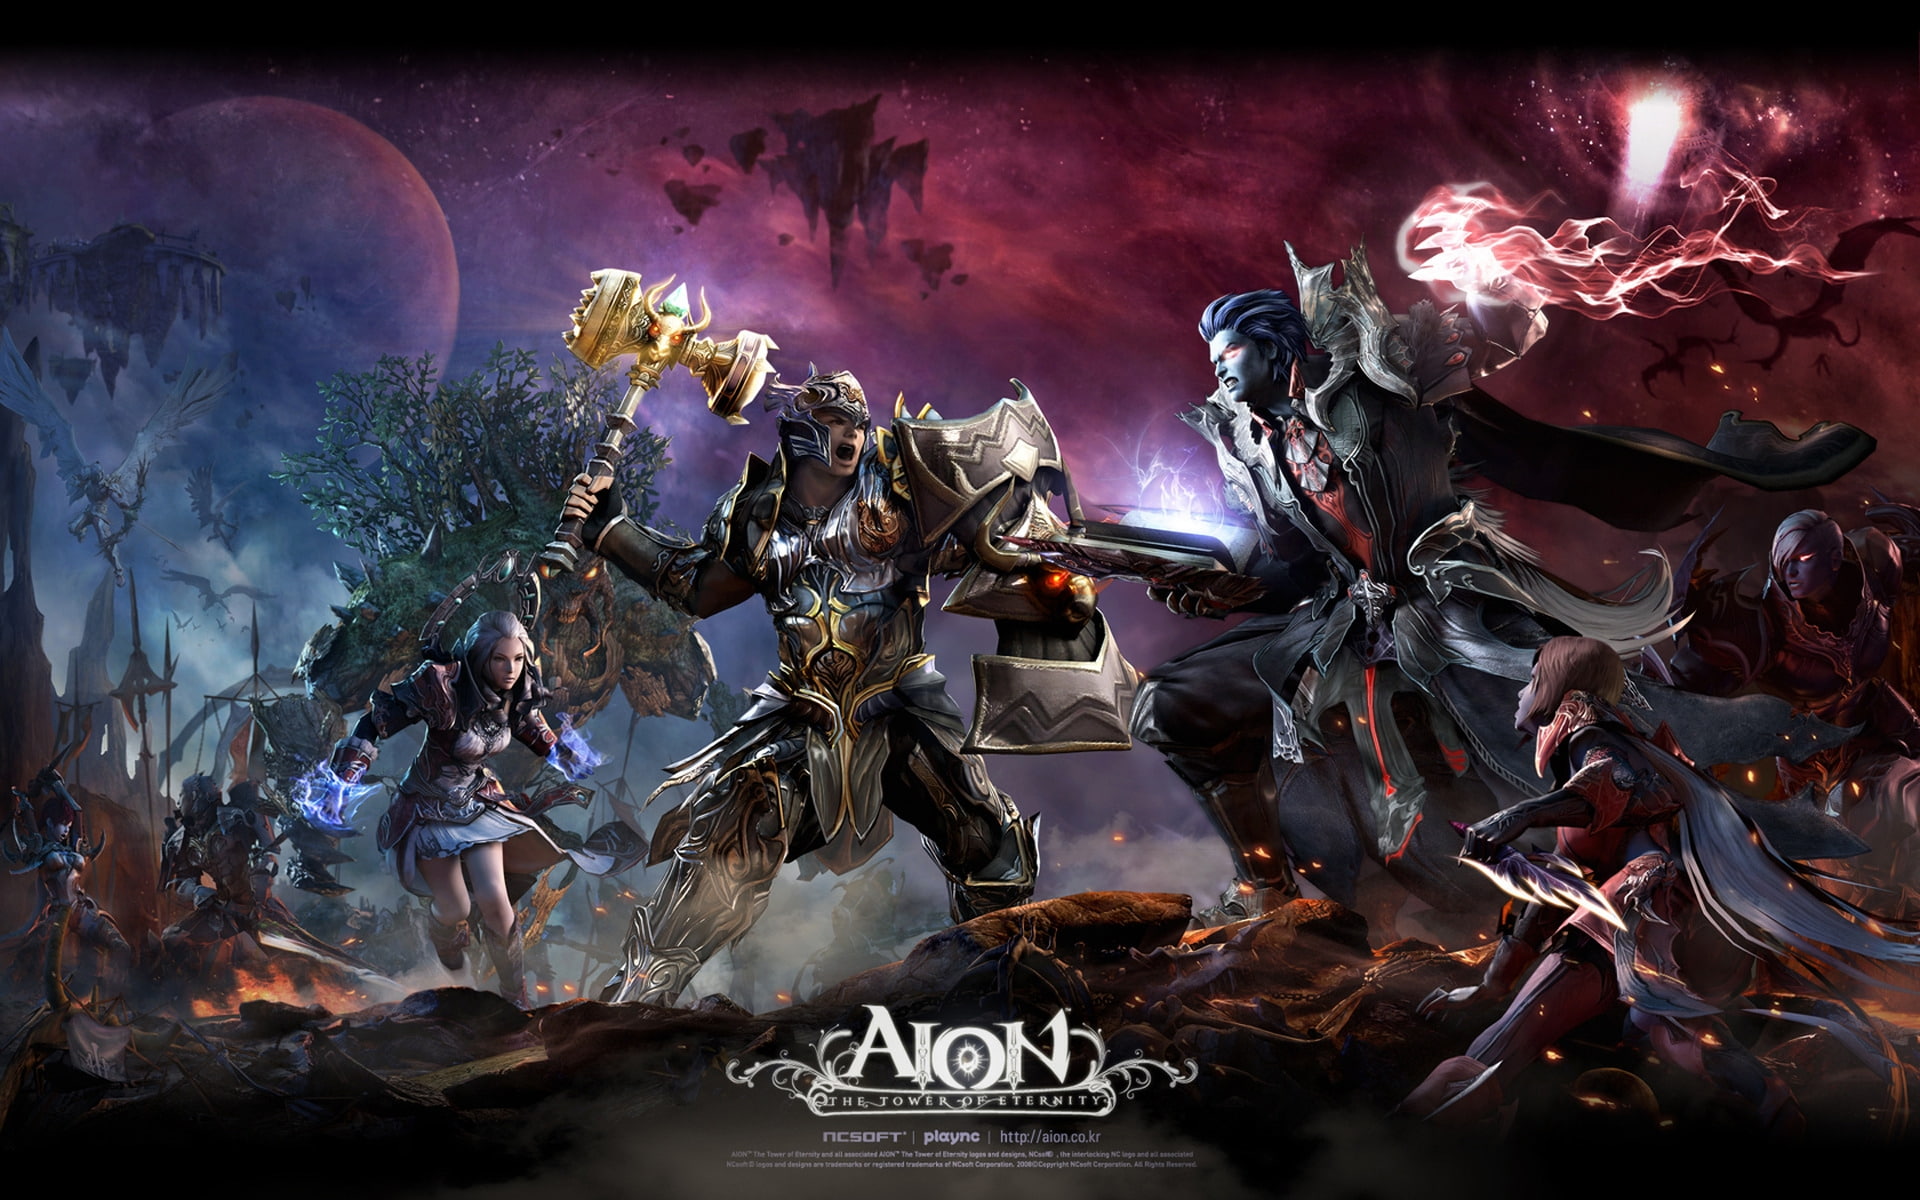 Aion The Tower of Eternity Characters, aion pc game poster, fantasy